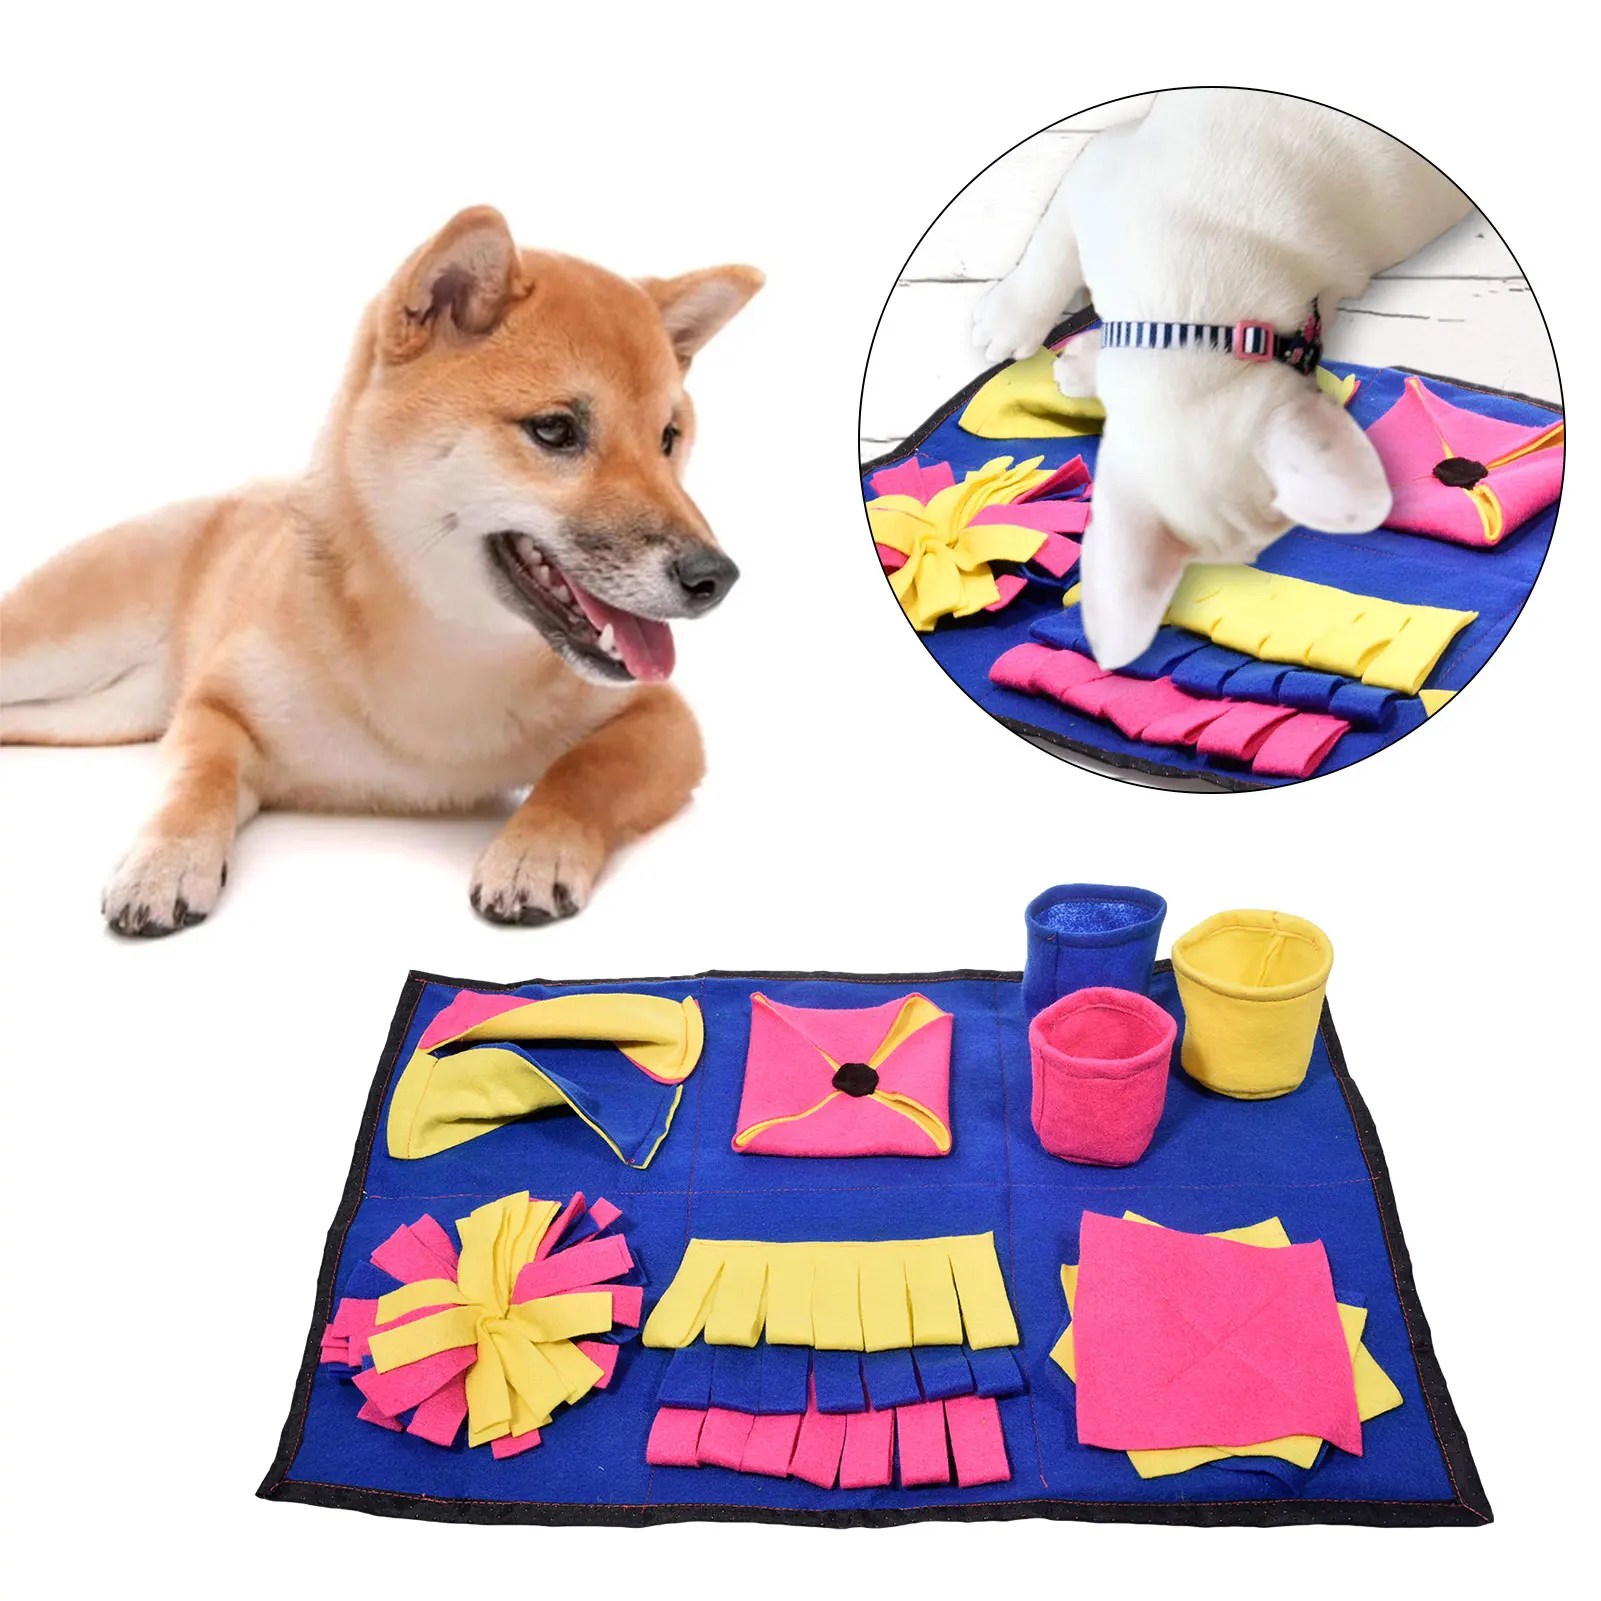 

Pet Dog Snuffle Mat Slow Feeding Mat Washable Foraging Smell Training Puzzle Toy Pet Dog Stress Relief Sniffing Training Blanket